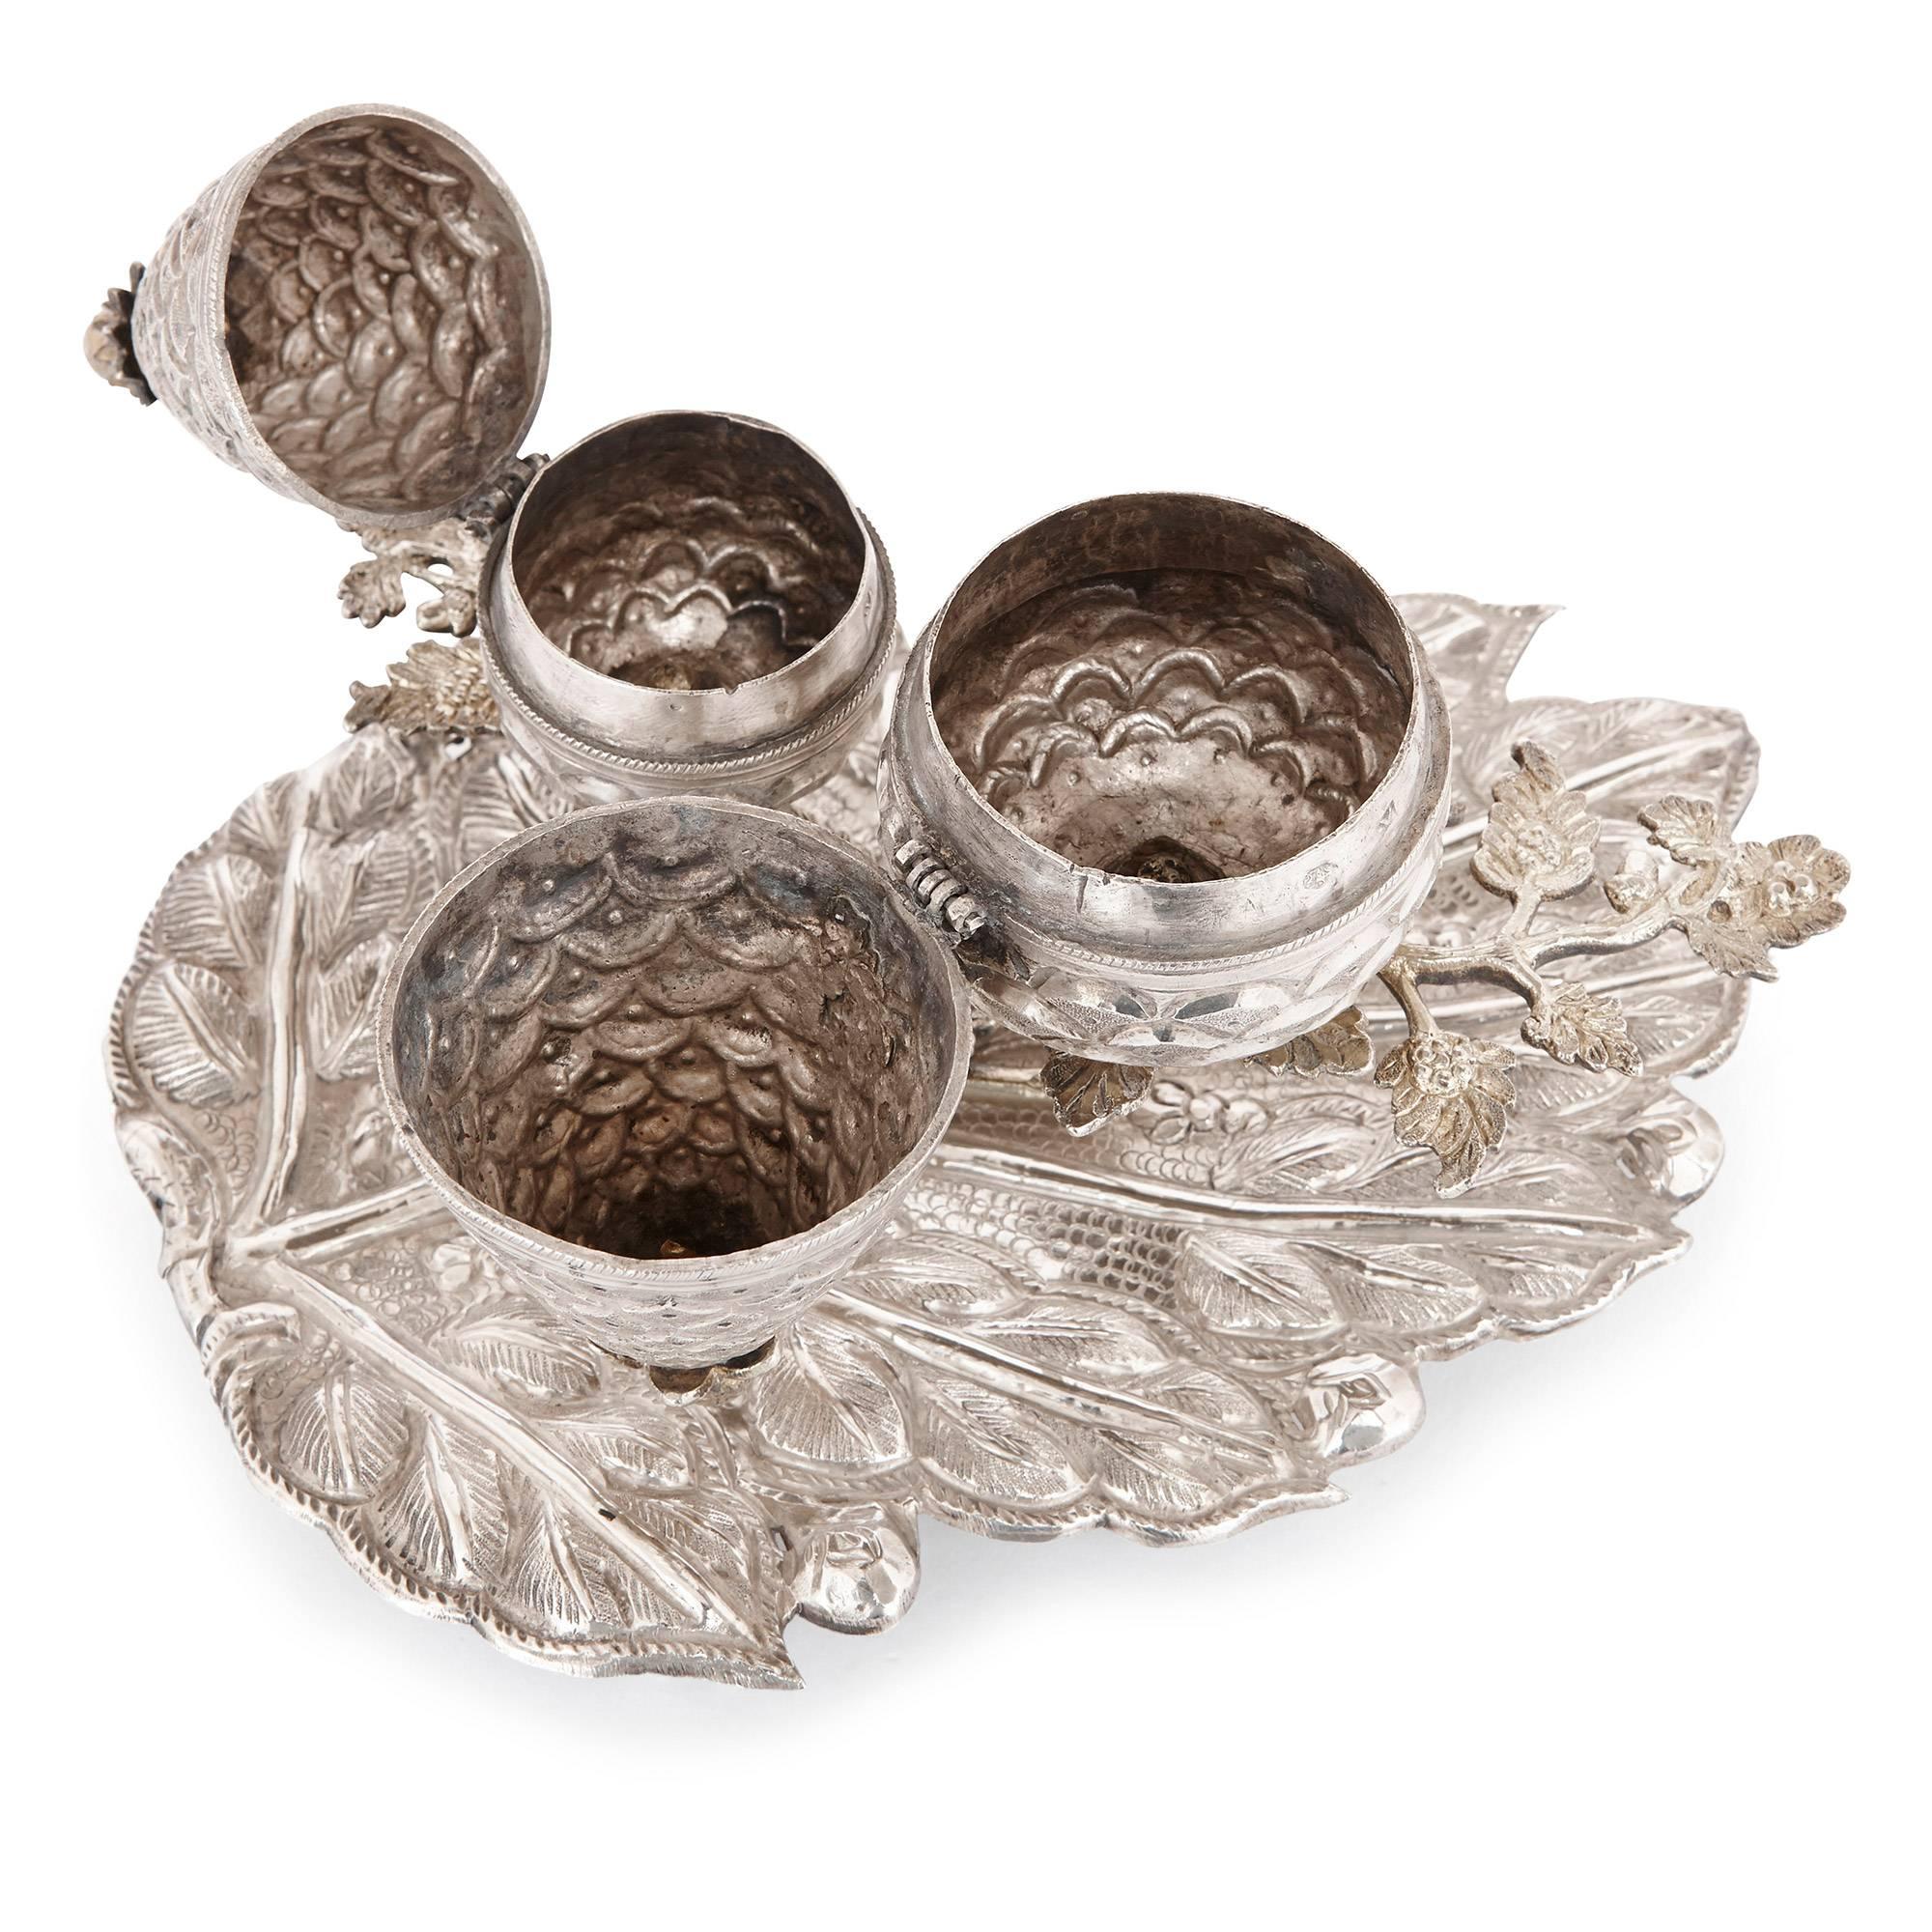 This beautifully decorated besamim, a decorative spice box used in the weekly Jewish ceremony of Havdalah, marking the conclusion of Shabbat (the Sabbath) - is a fine piece of antique Judaica which has been delicately crafted from solid silver. It